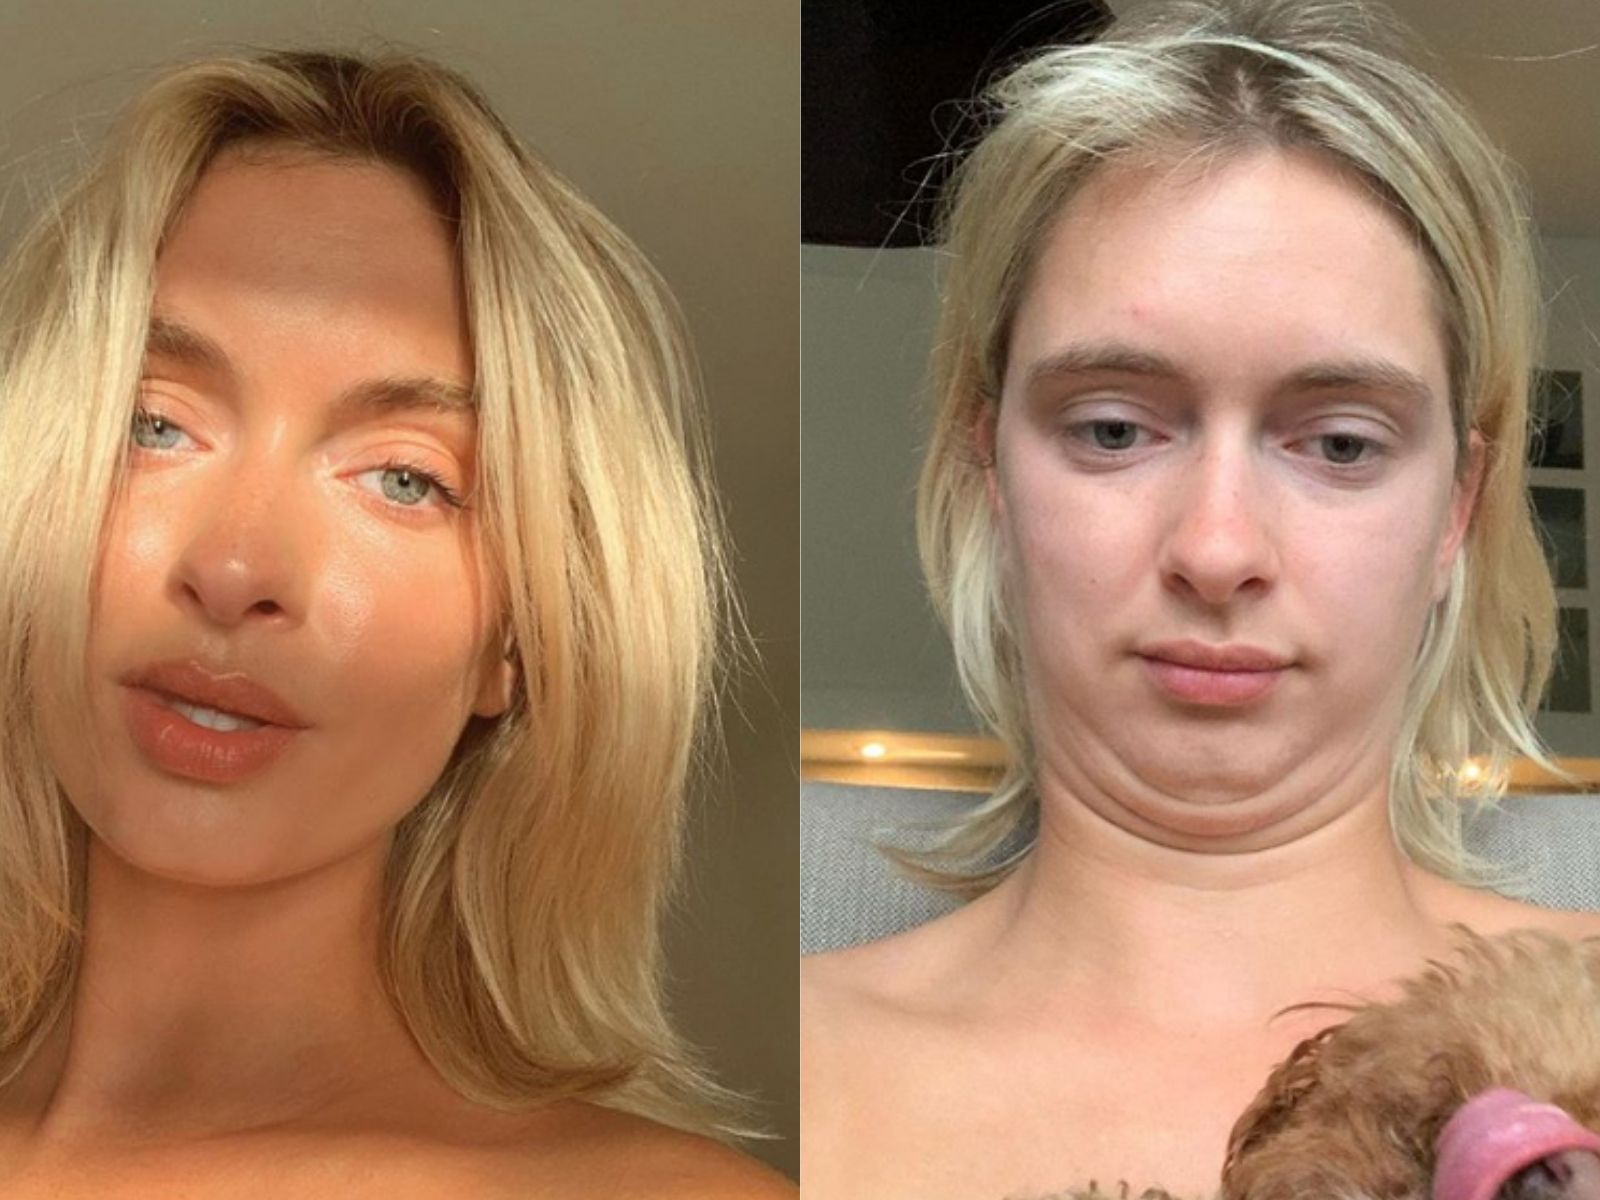 An influencer turns her Instagram outtakes into hilarious side-by-side  photos to prove that social media isn't real life